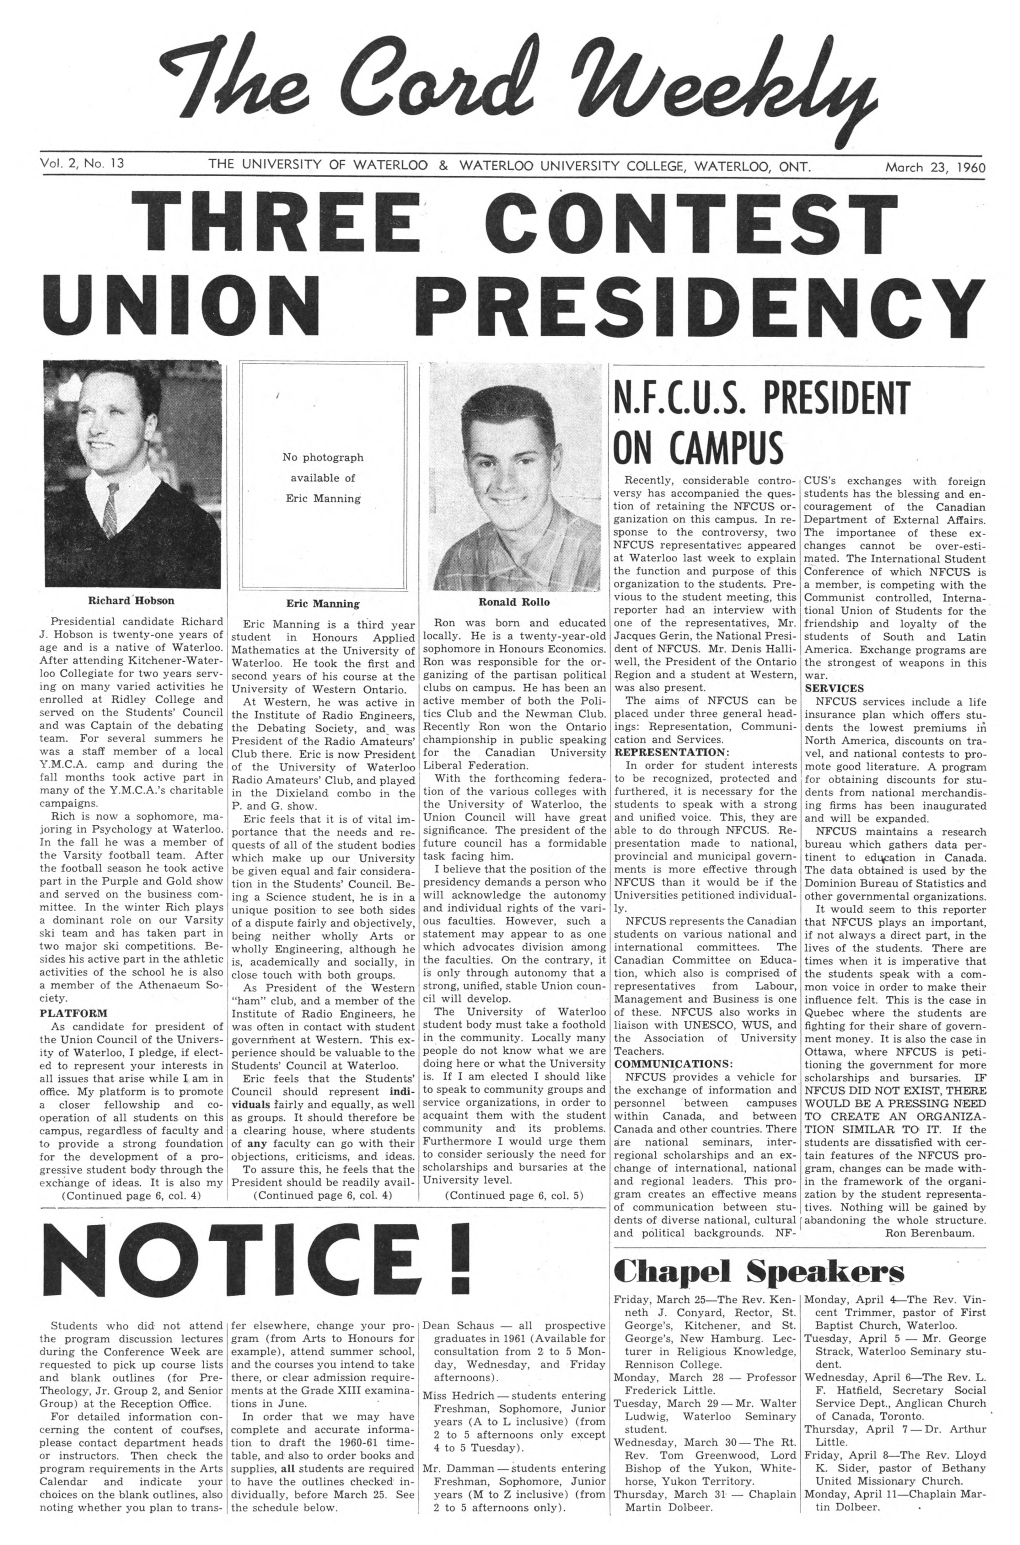 The Cord Weekly (March 23, 1960)